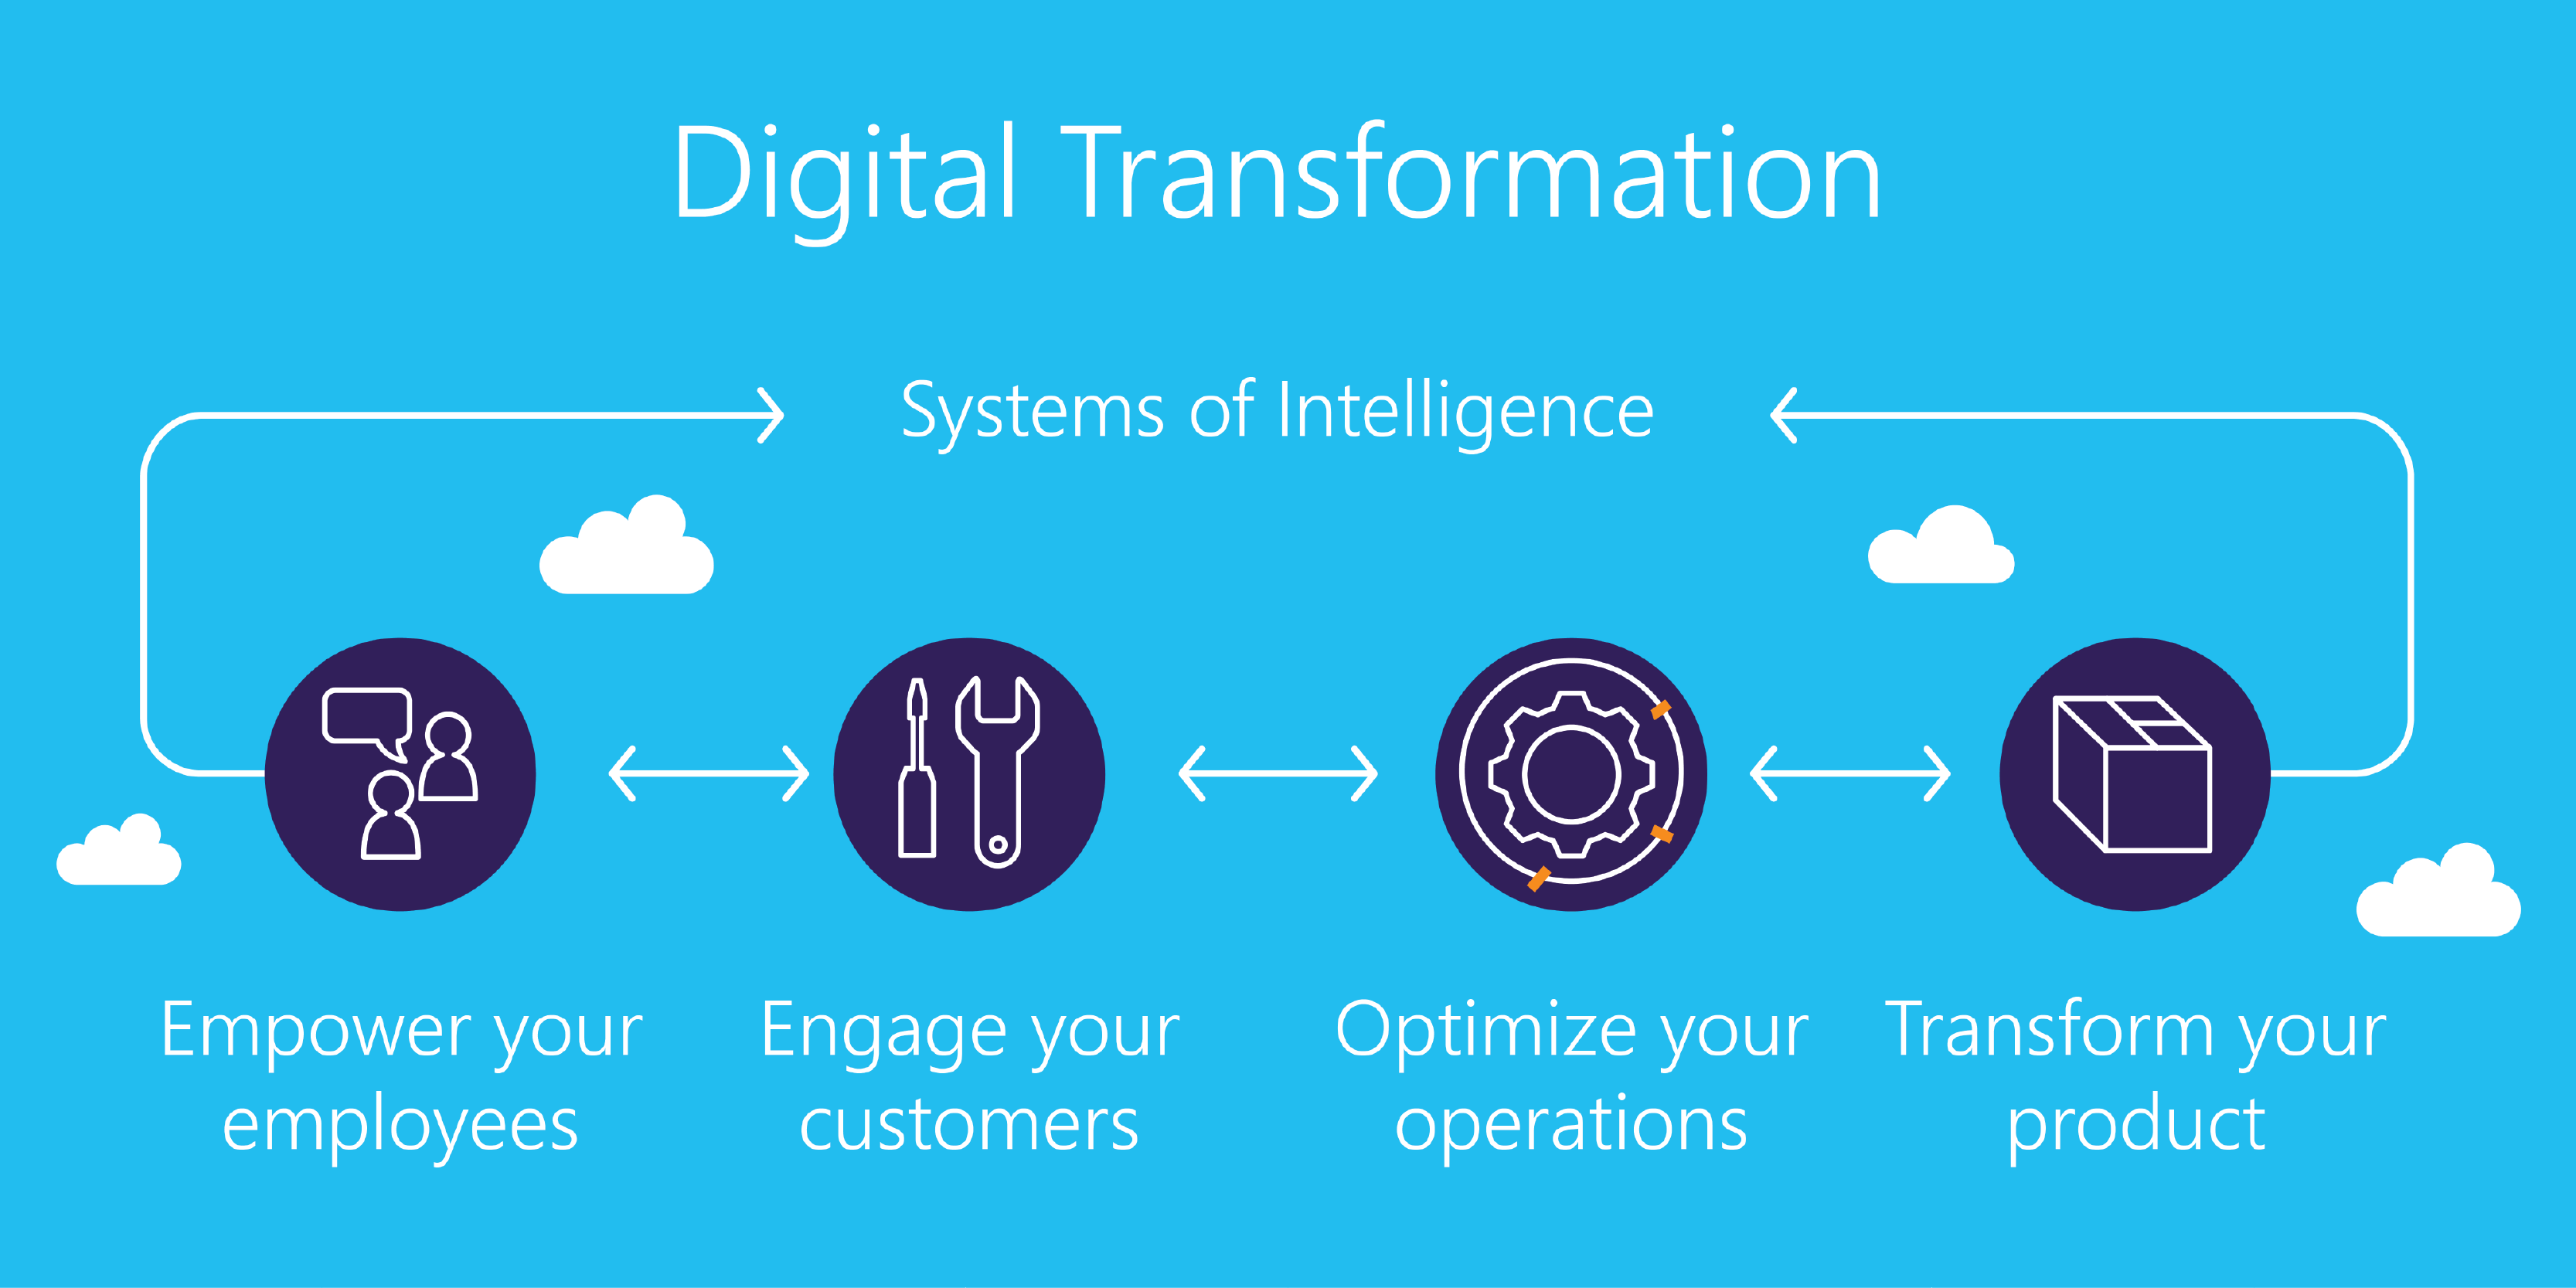 Digital Transformation Training in Corvallis | Introduction to Digital Transformation training for beginners | Getting started with Digital Transformation | What is Digital Transformation | January 20 - February 12, 2020